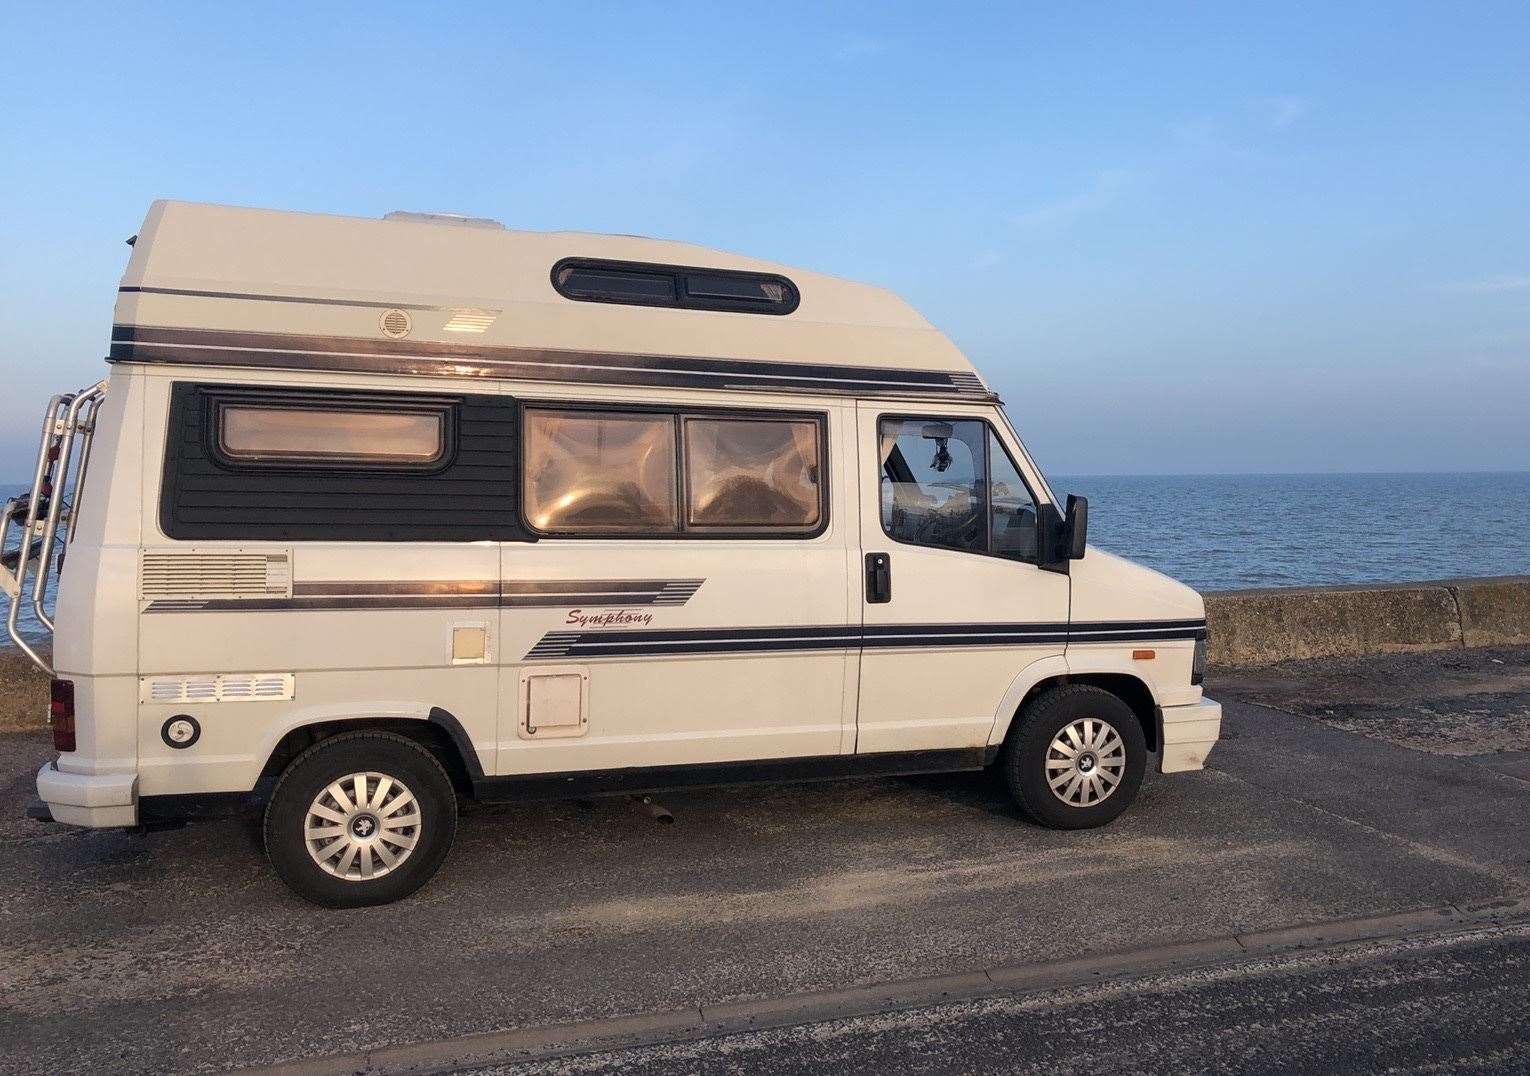 Paul will complete the challenge in his campervan